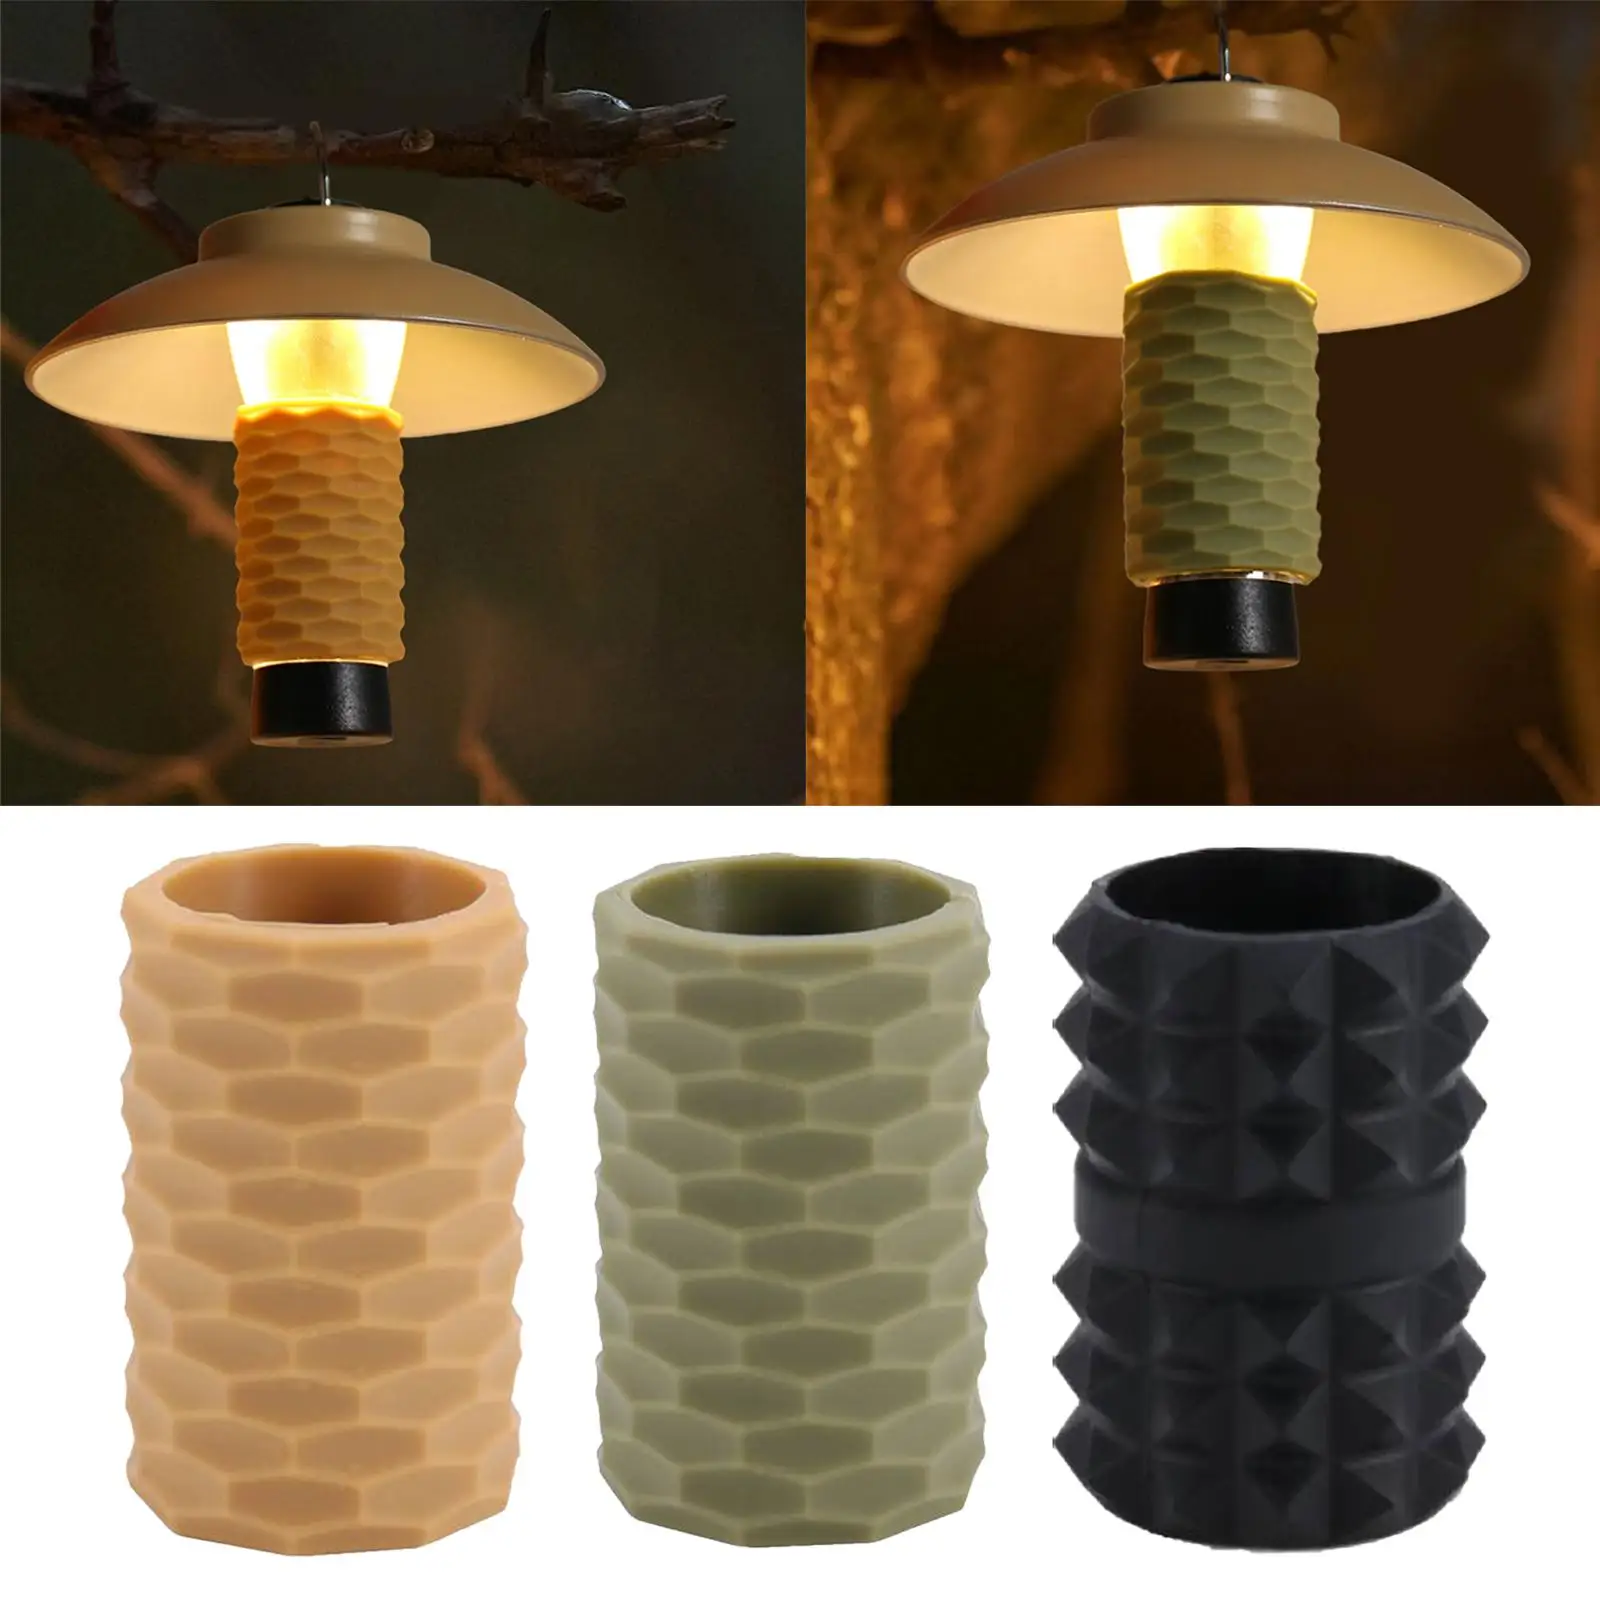 Lamp Sleeve Cover Camping Lights Cover Flashlight Sleeves Grip LED Lights Lighthouse Nonslip Torch Lantern Lampshade for Hiking